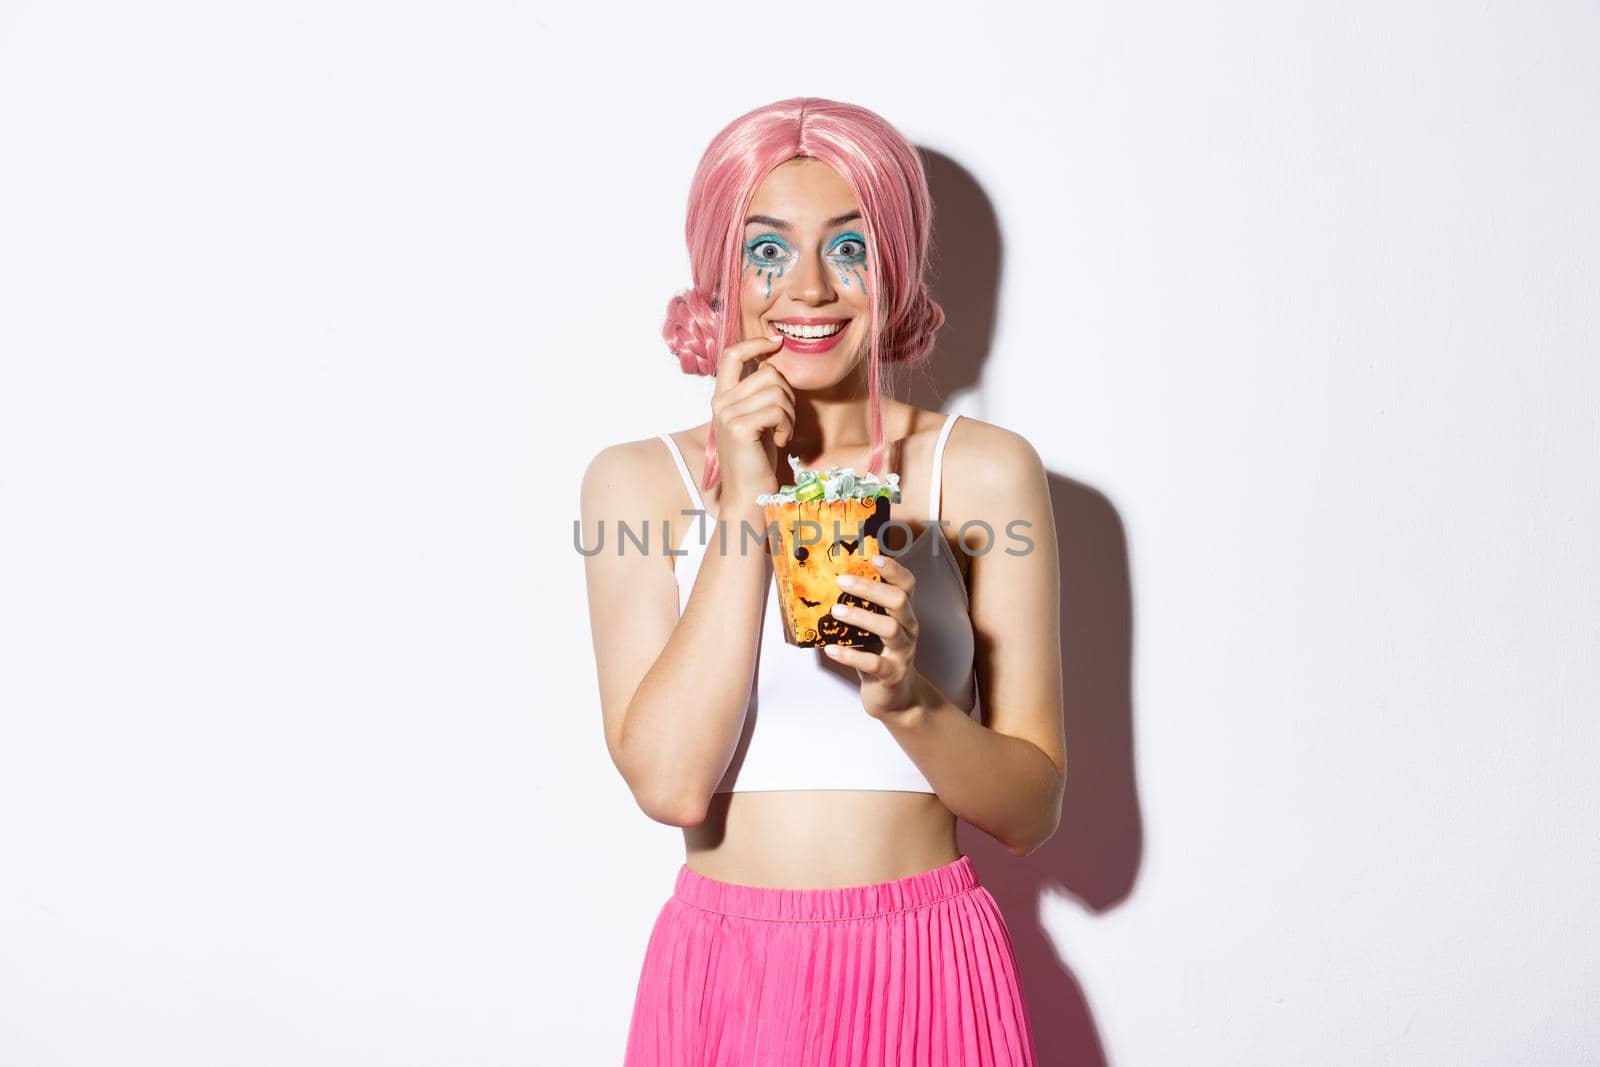 Image of happy attractive girl with pink wig and bright makeup going trick or treat, celebrating halloween, showing candies and smiling, standing over white background.